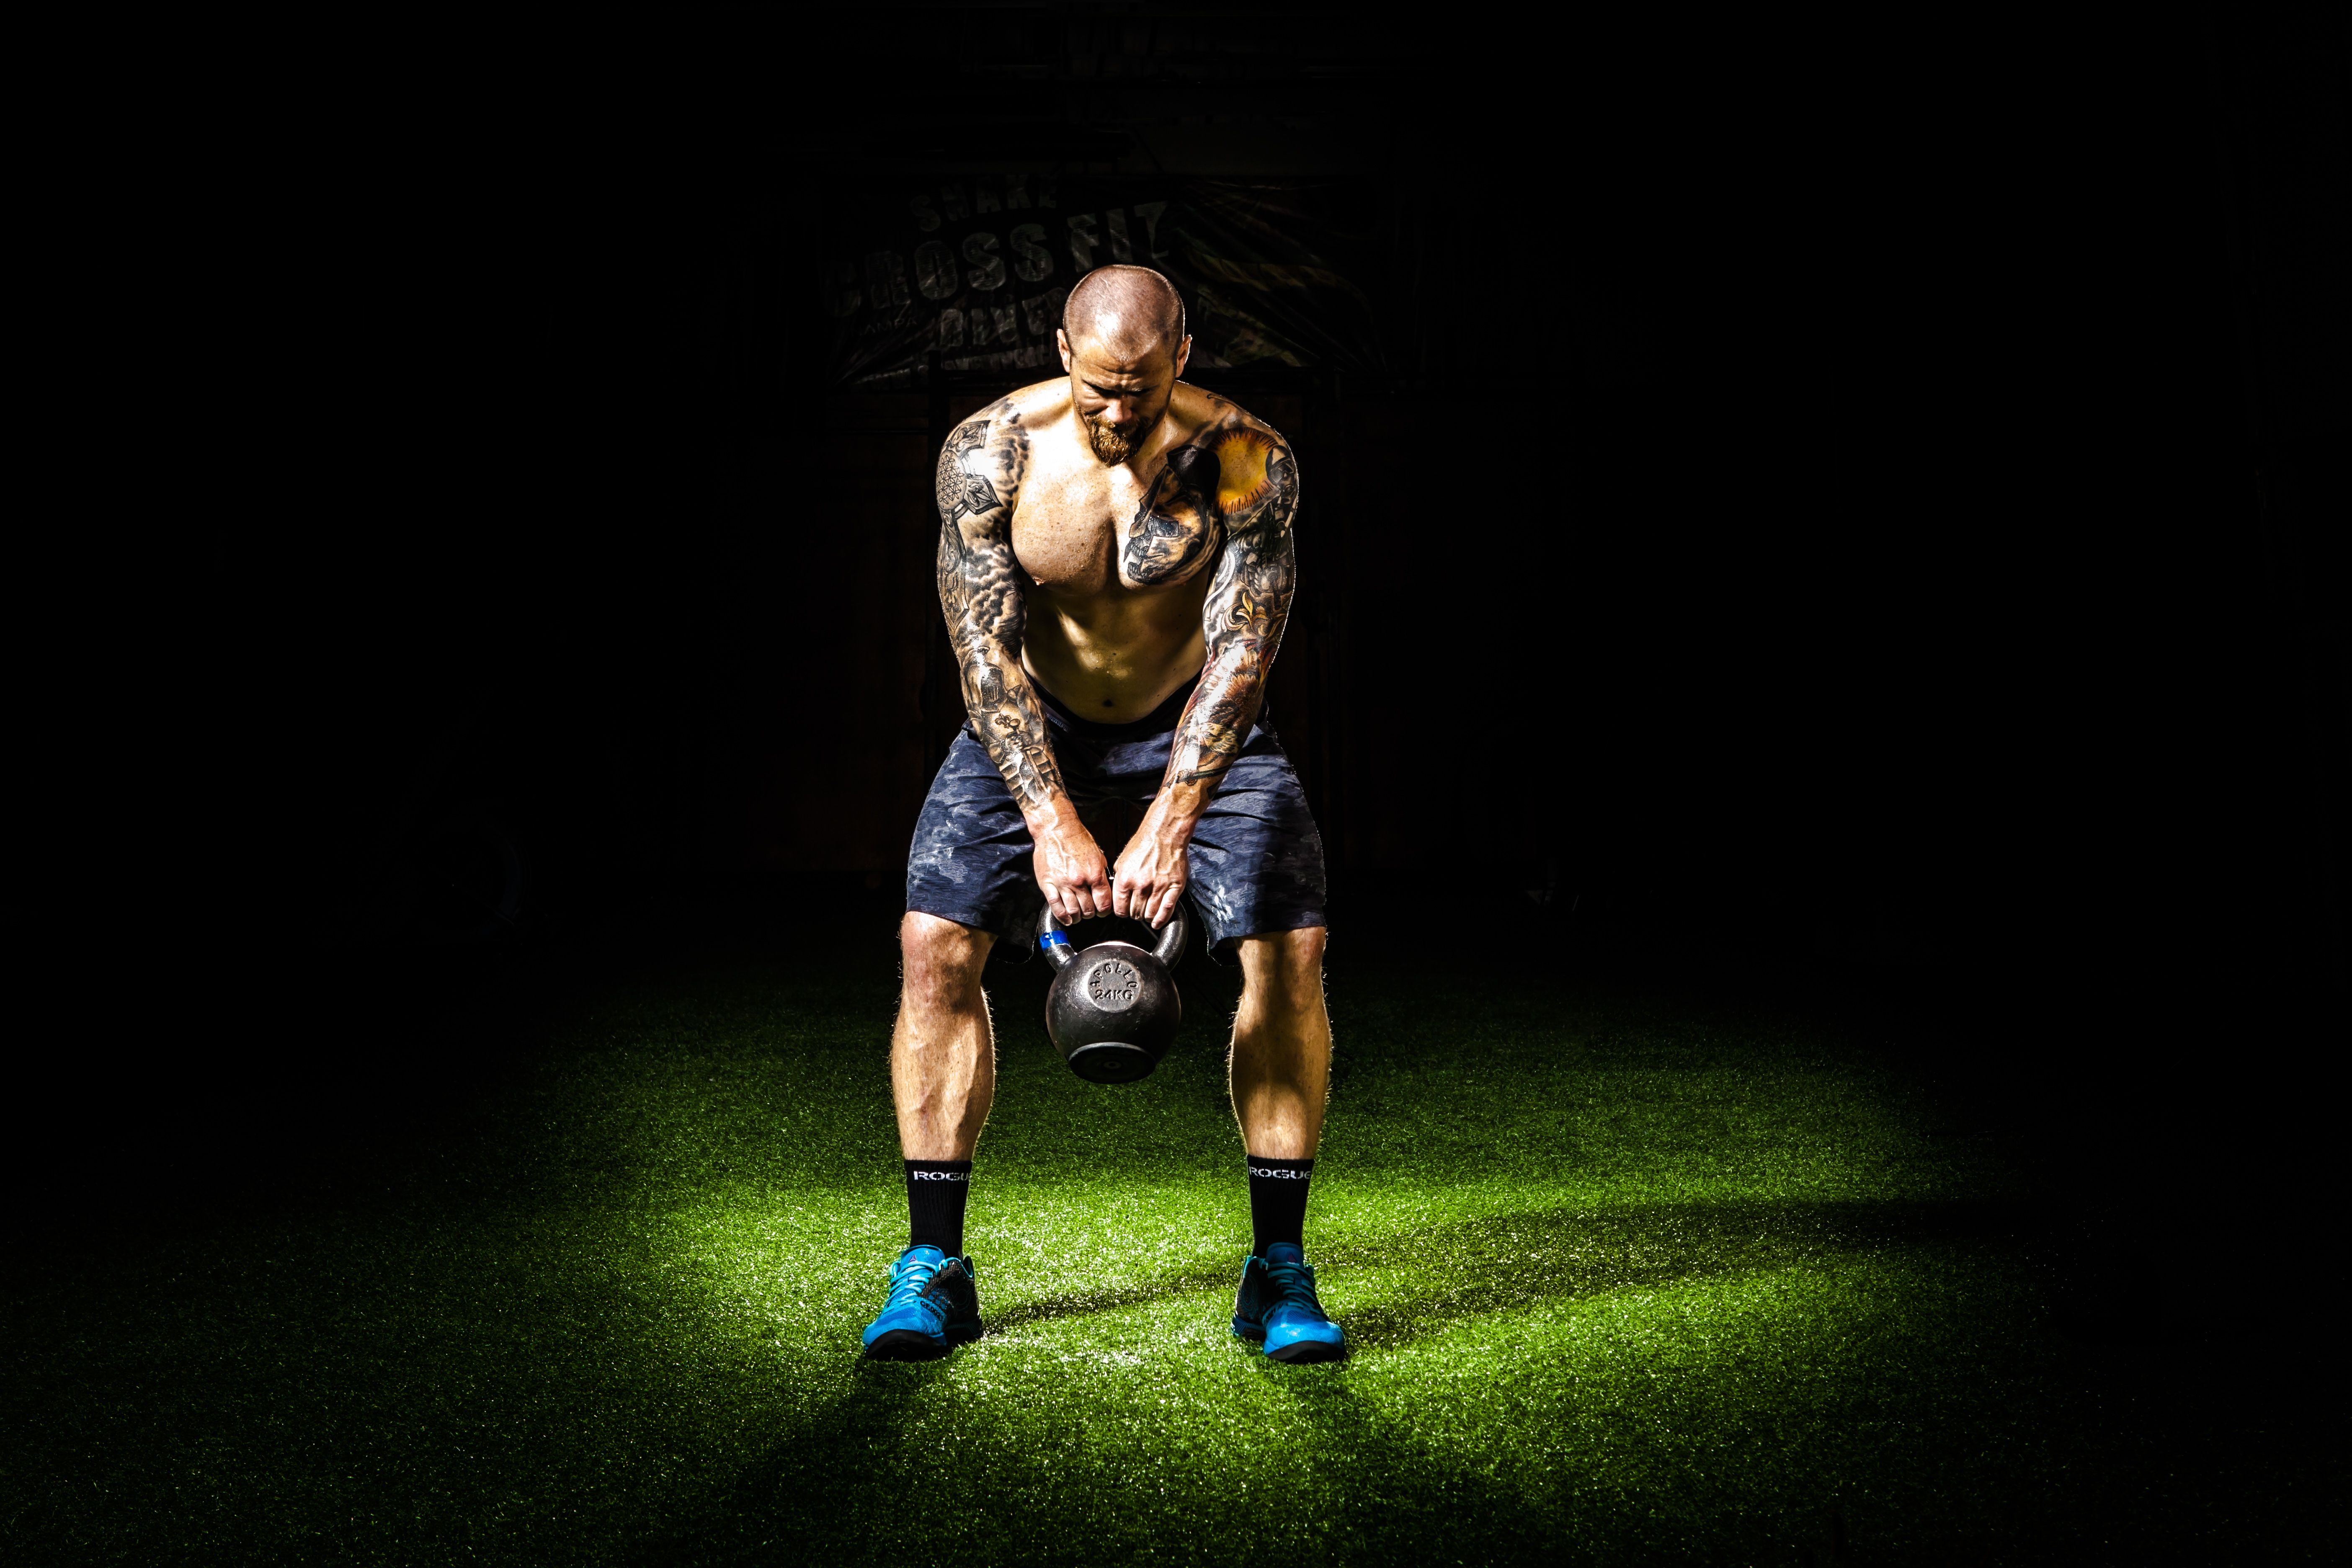 How to build muscles kettlebell